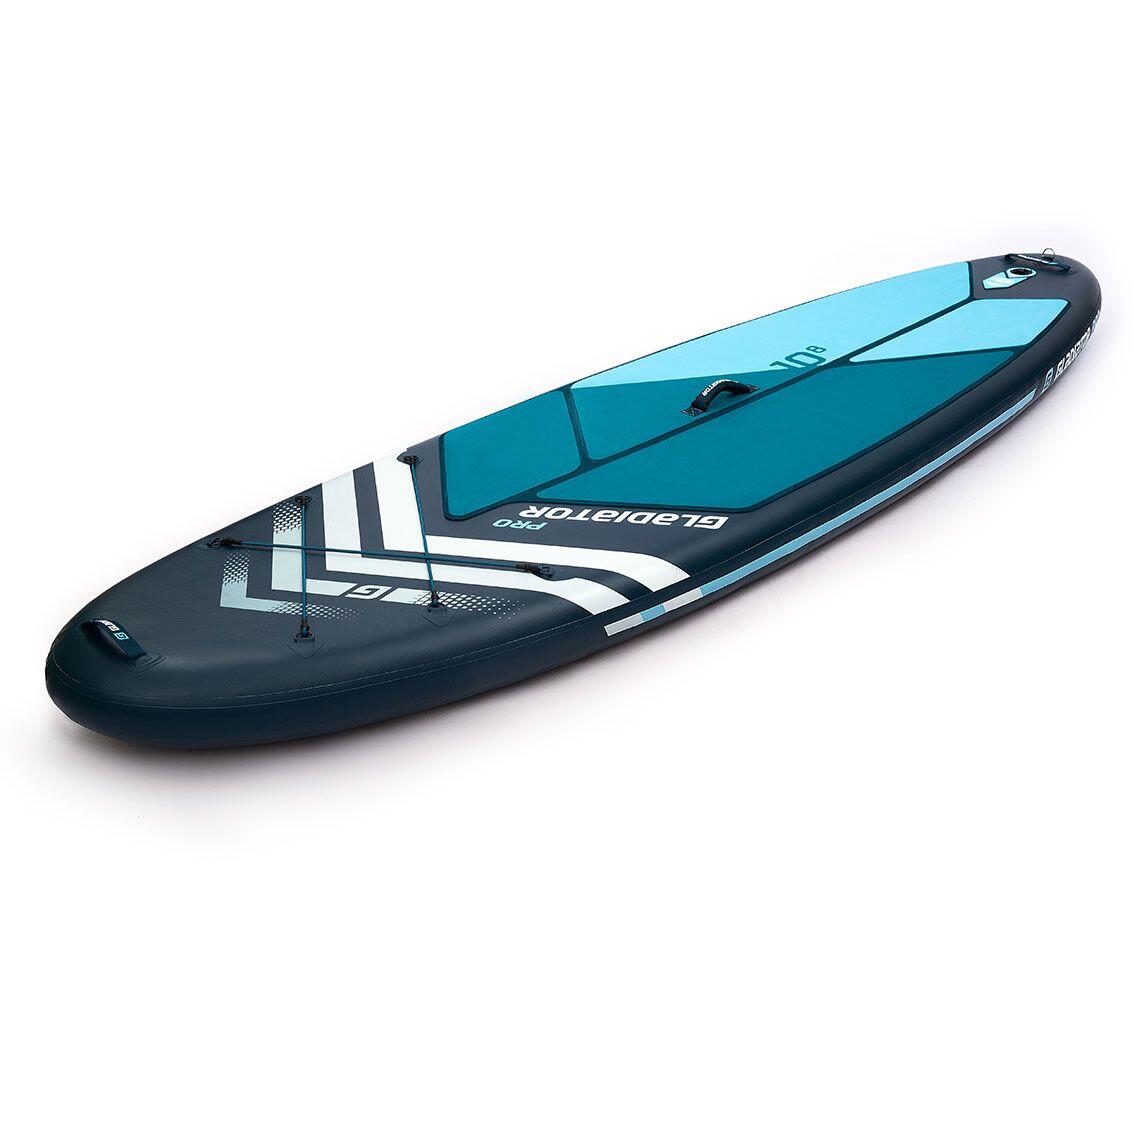 Gladiator Pro All Round 10’8 x 34” x 5.9" Perfect For The Heavier Rider 6/7